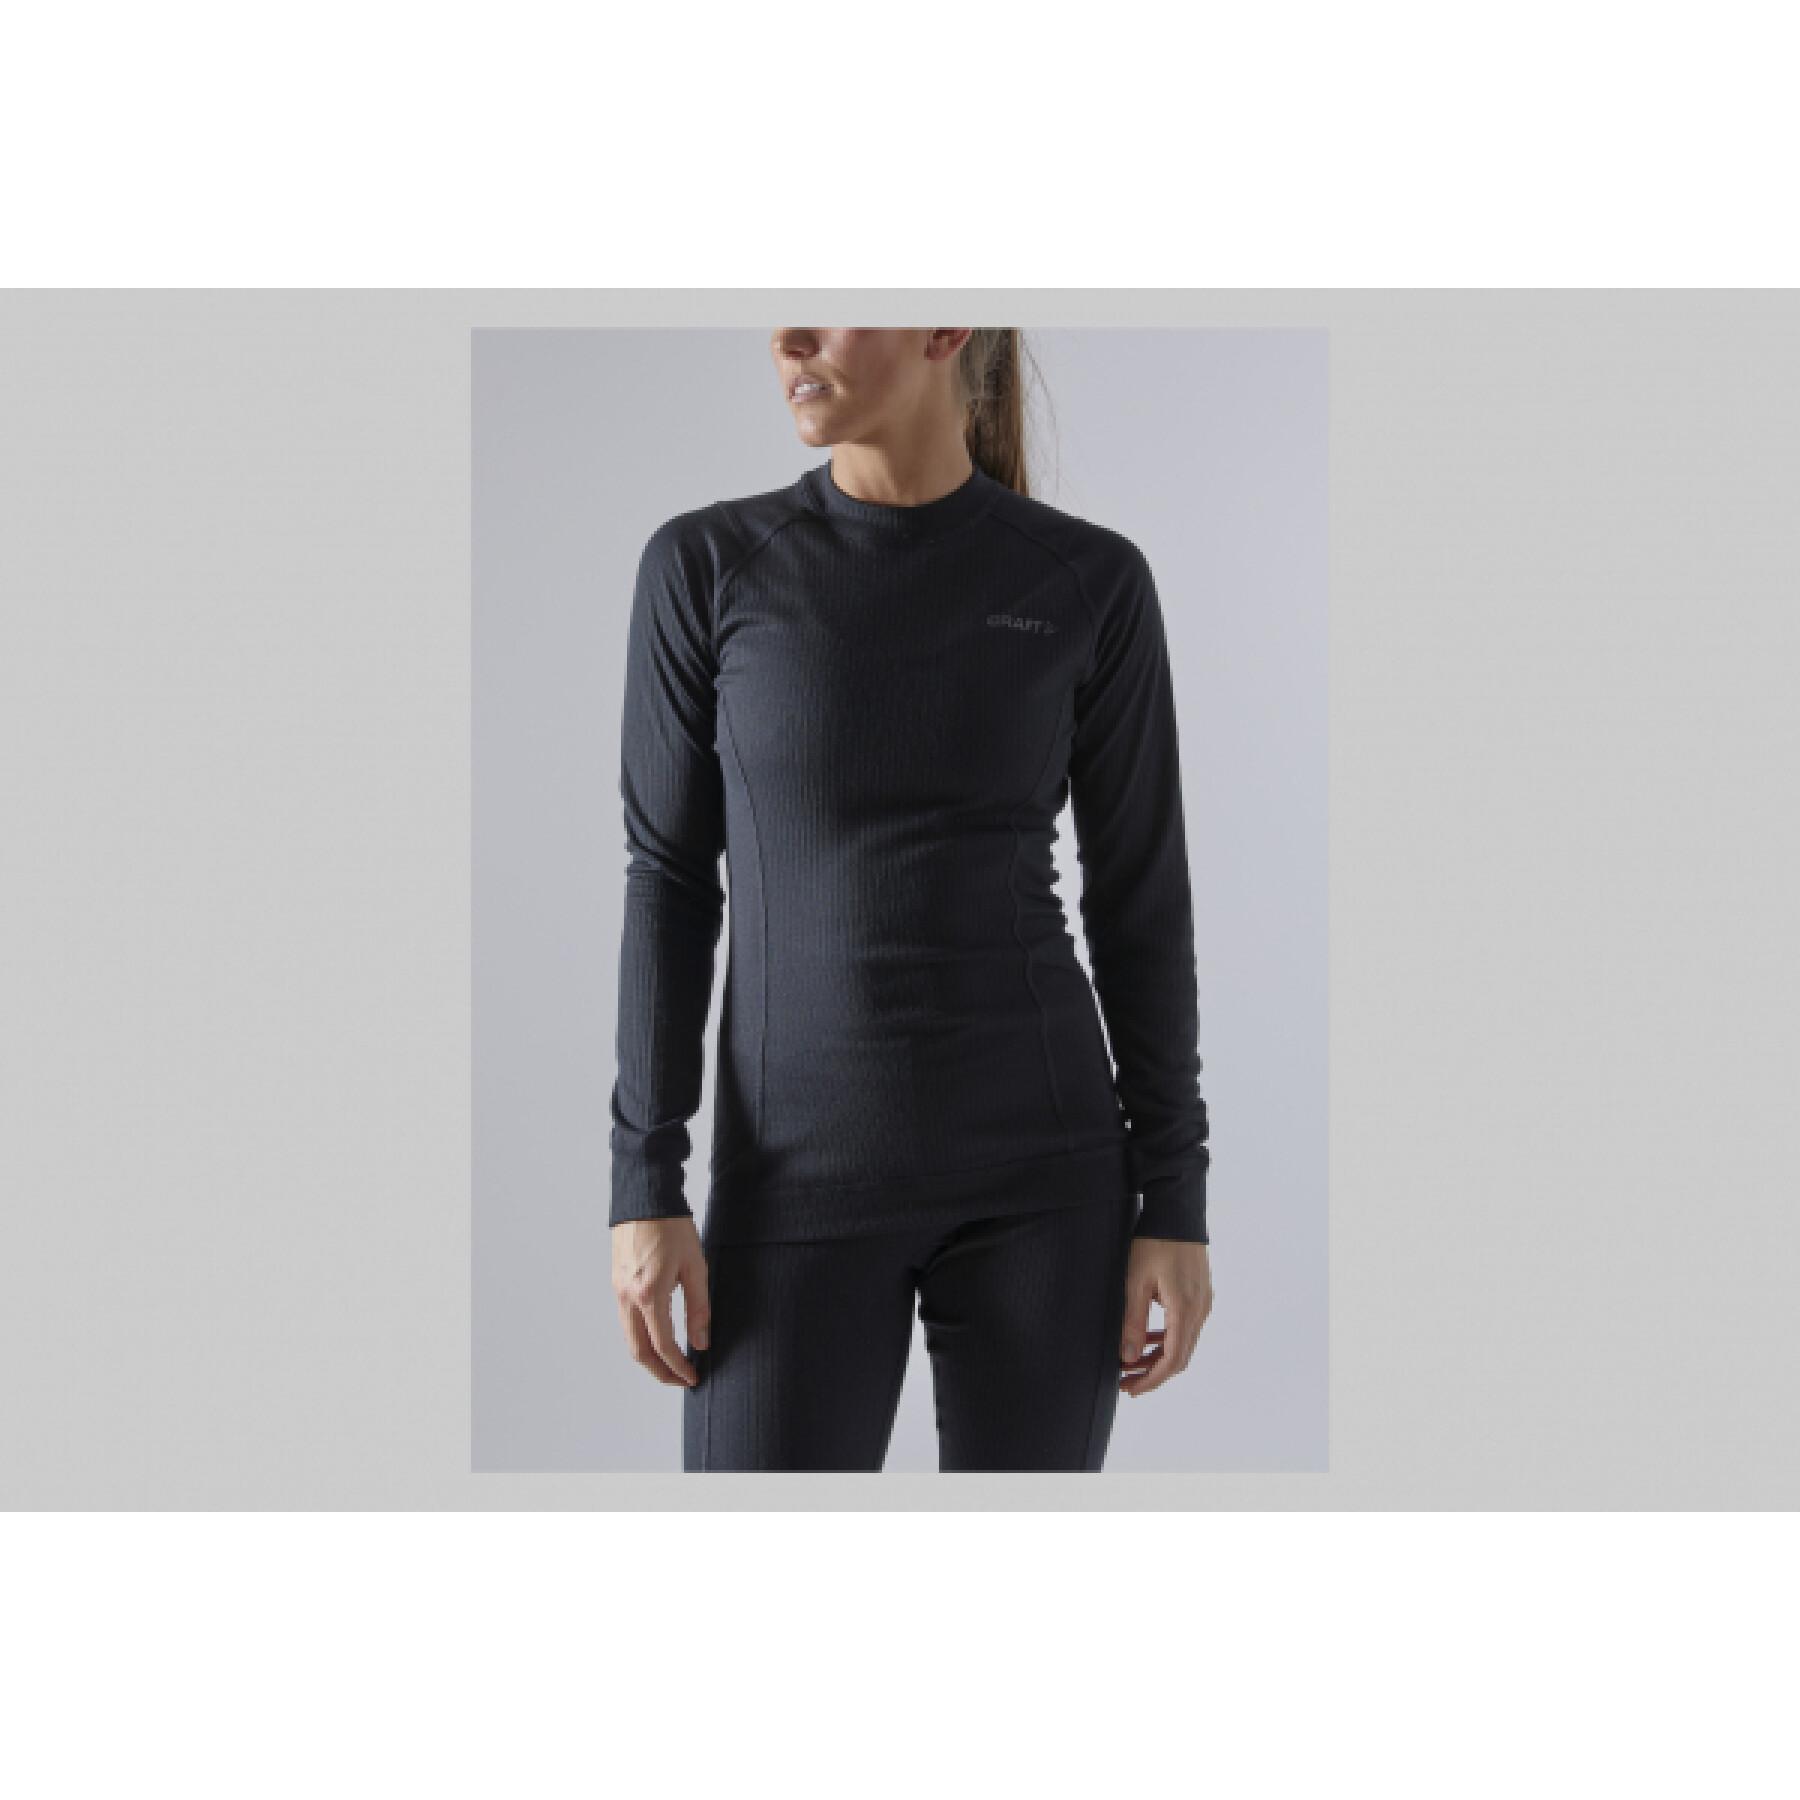 Women's outfit Craft Core Dry Baselayer Set